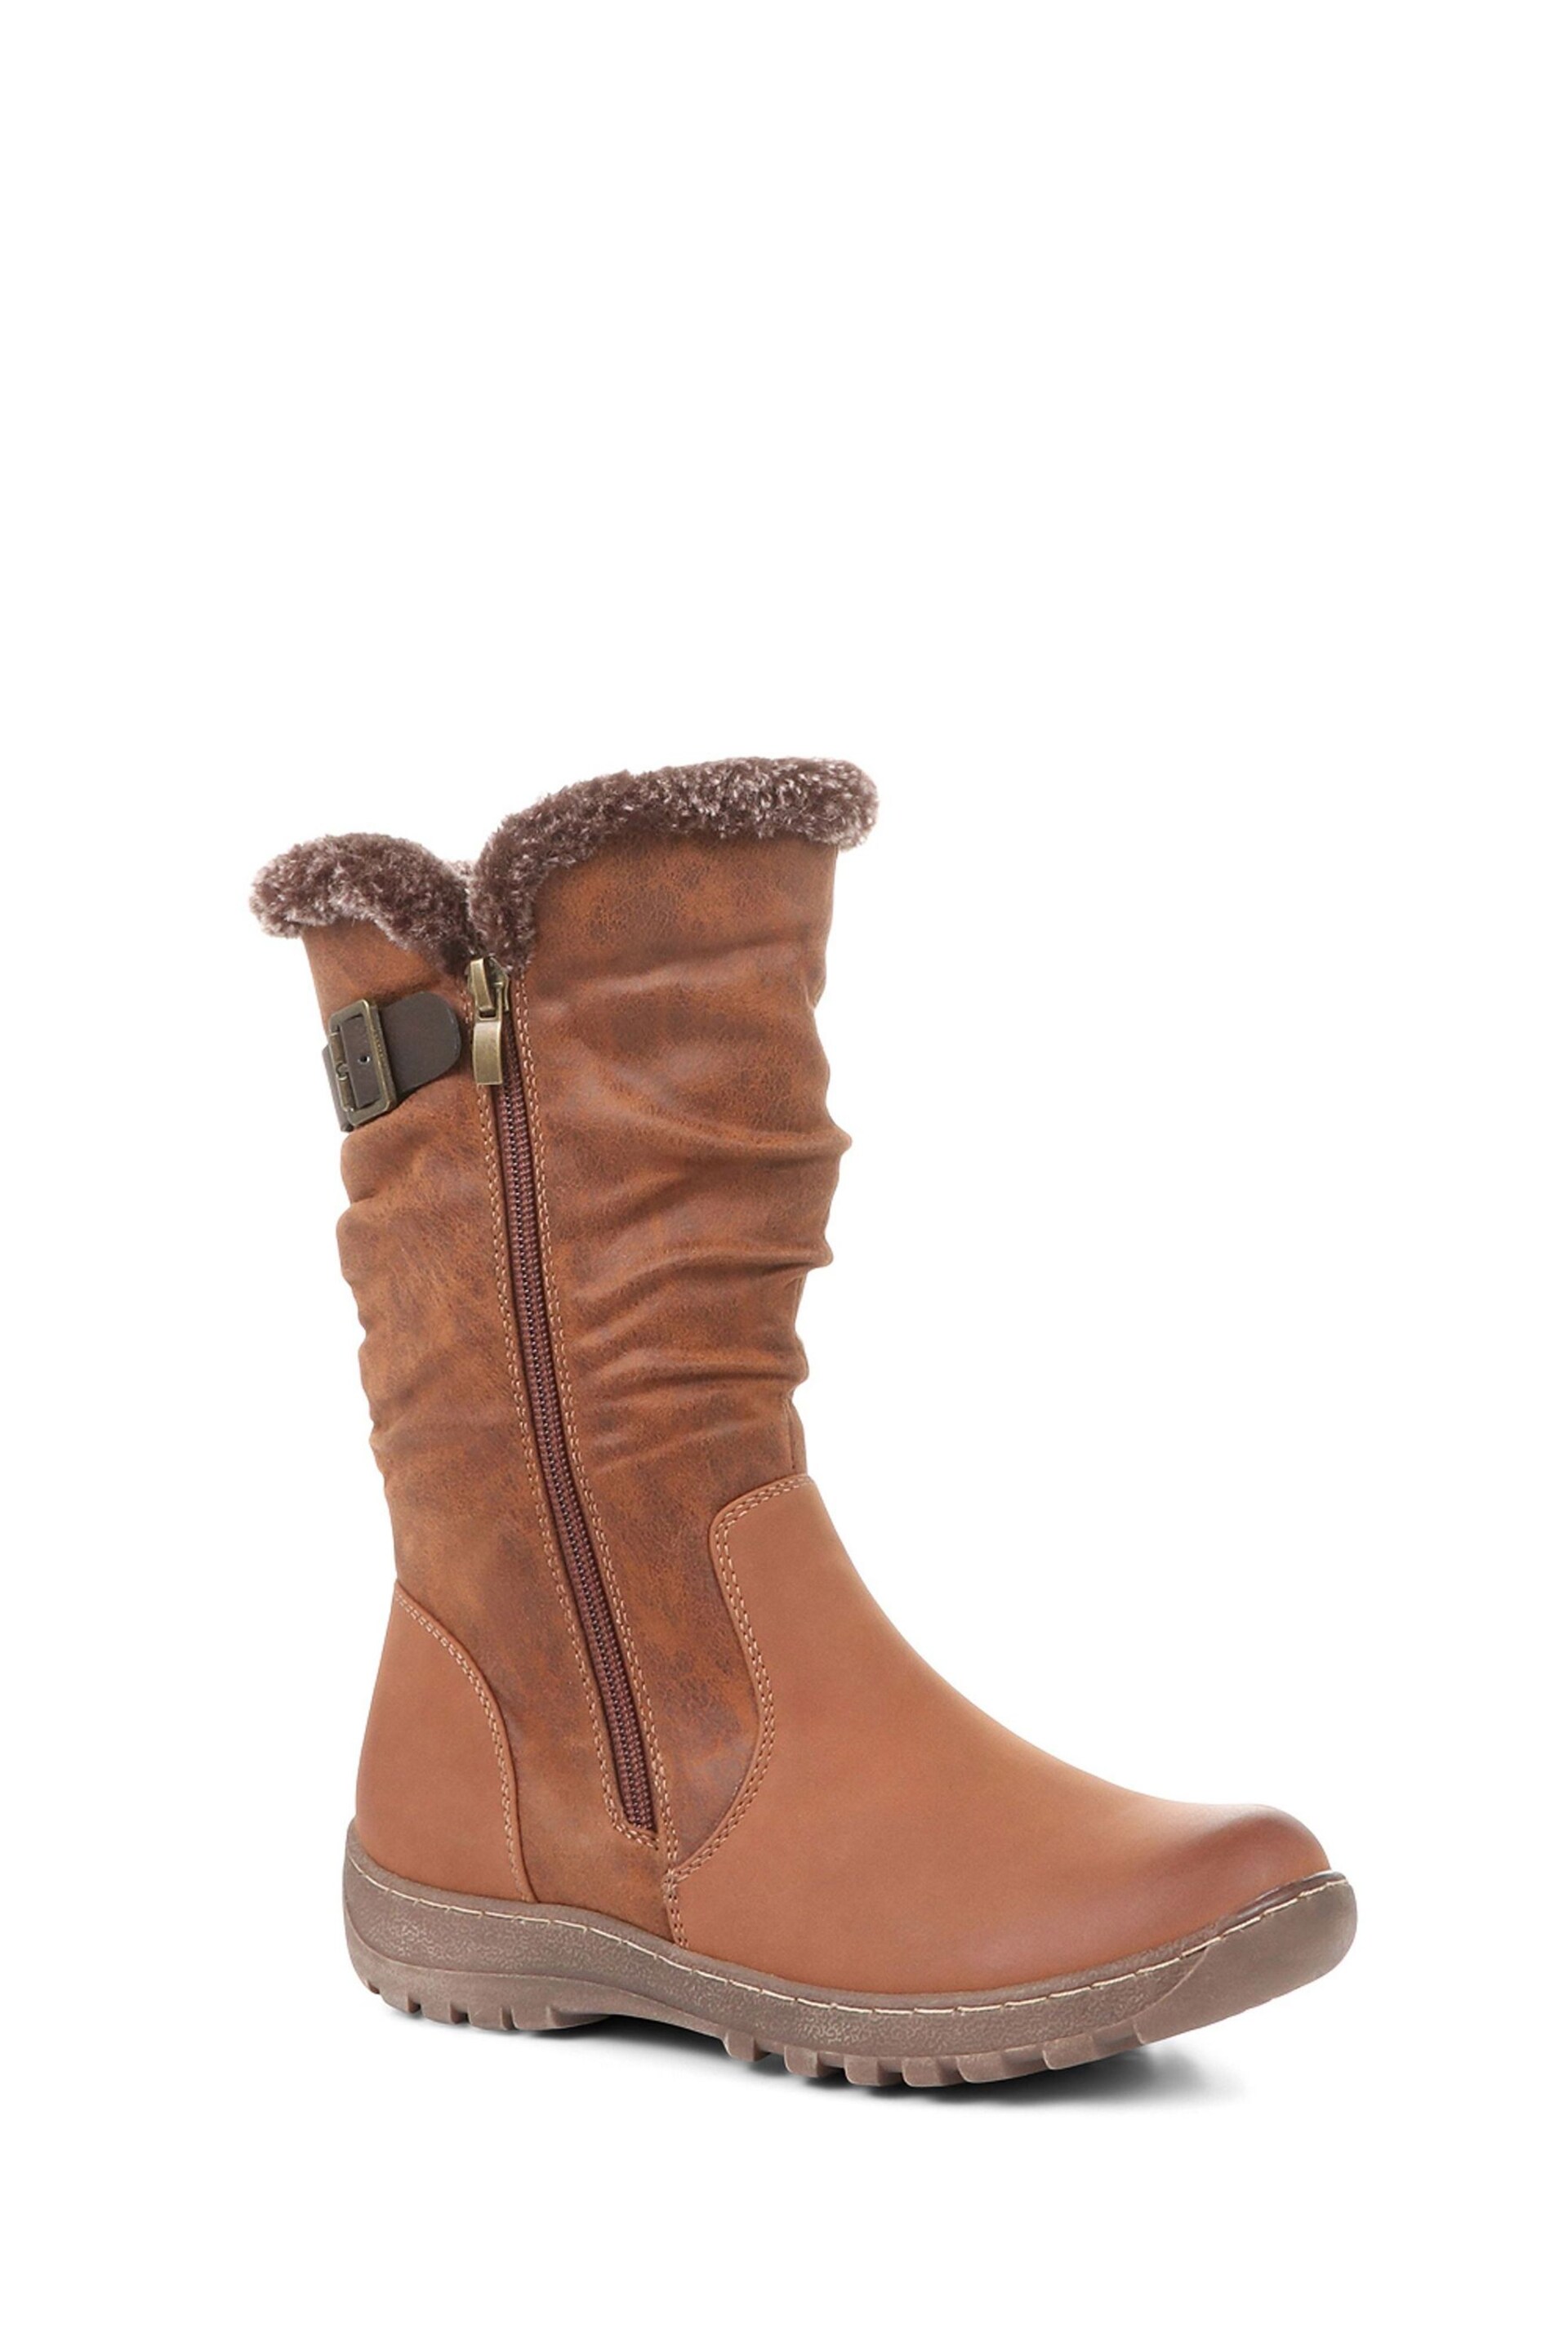 Pavers Lightweight Brown Calf Boots - Image 2 of 5